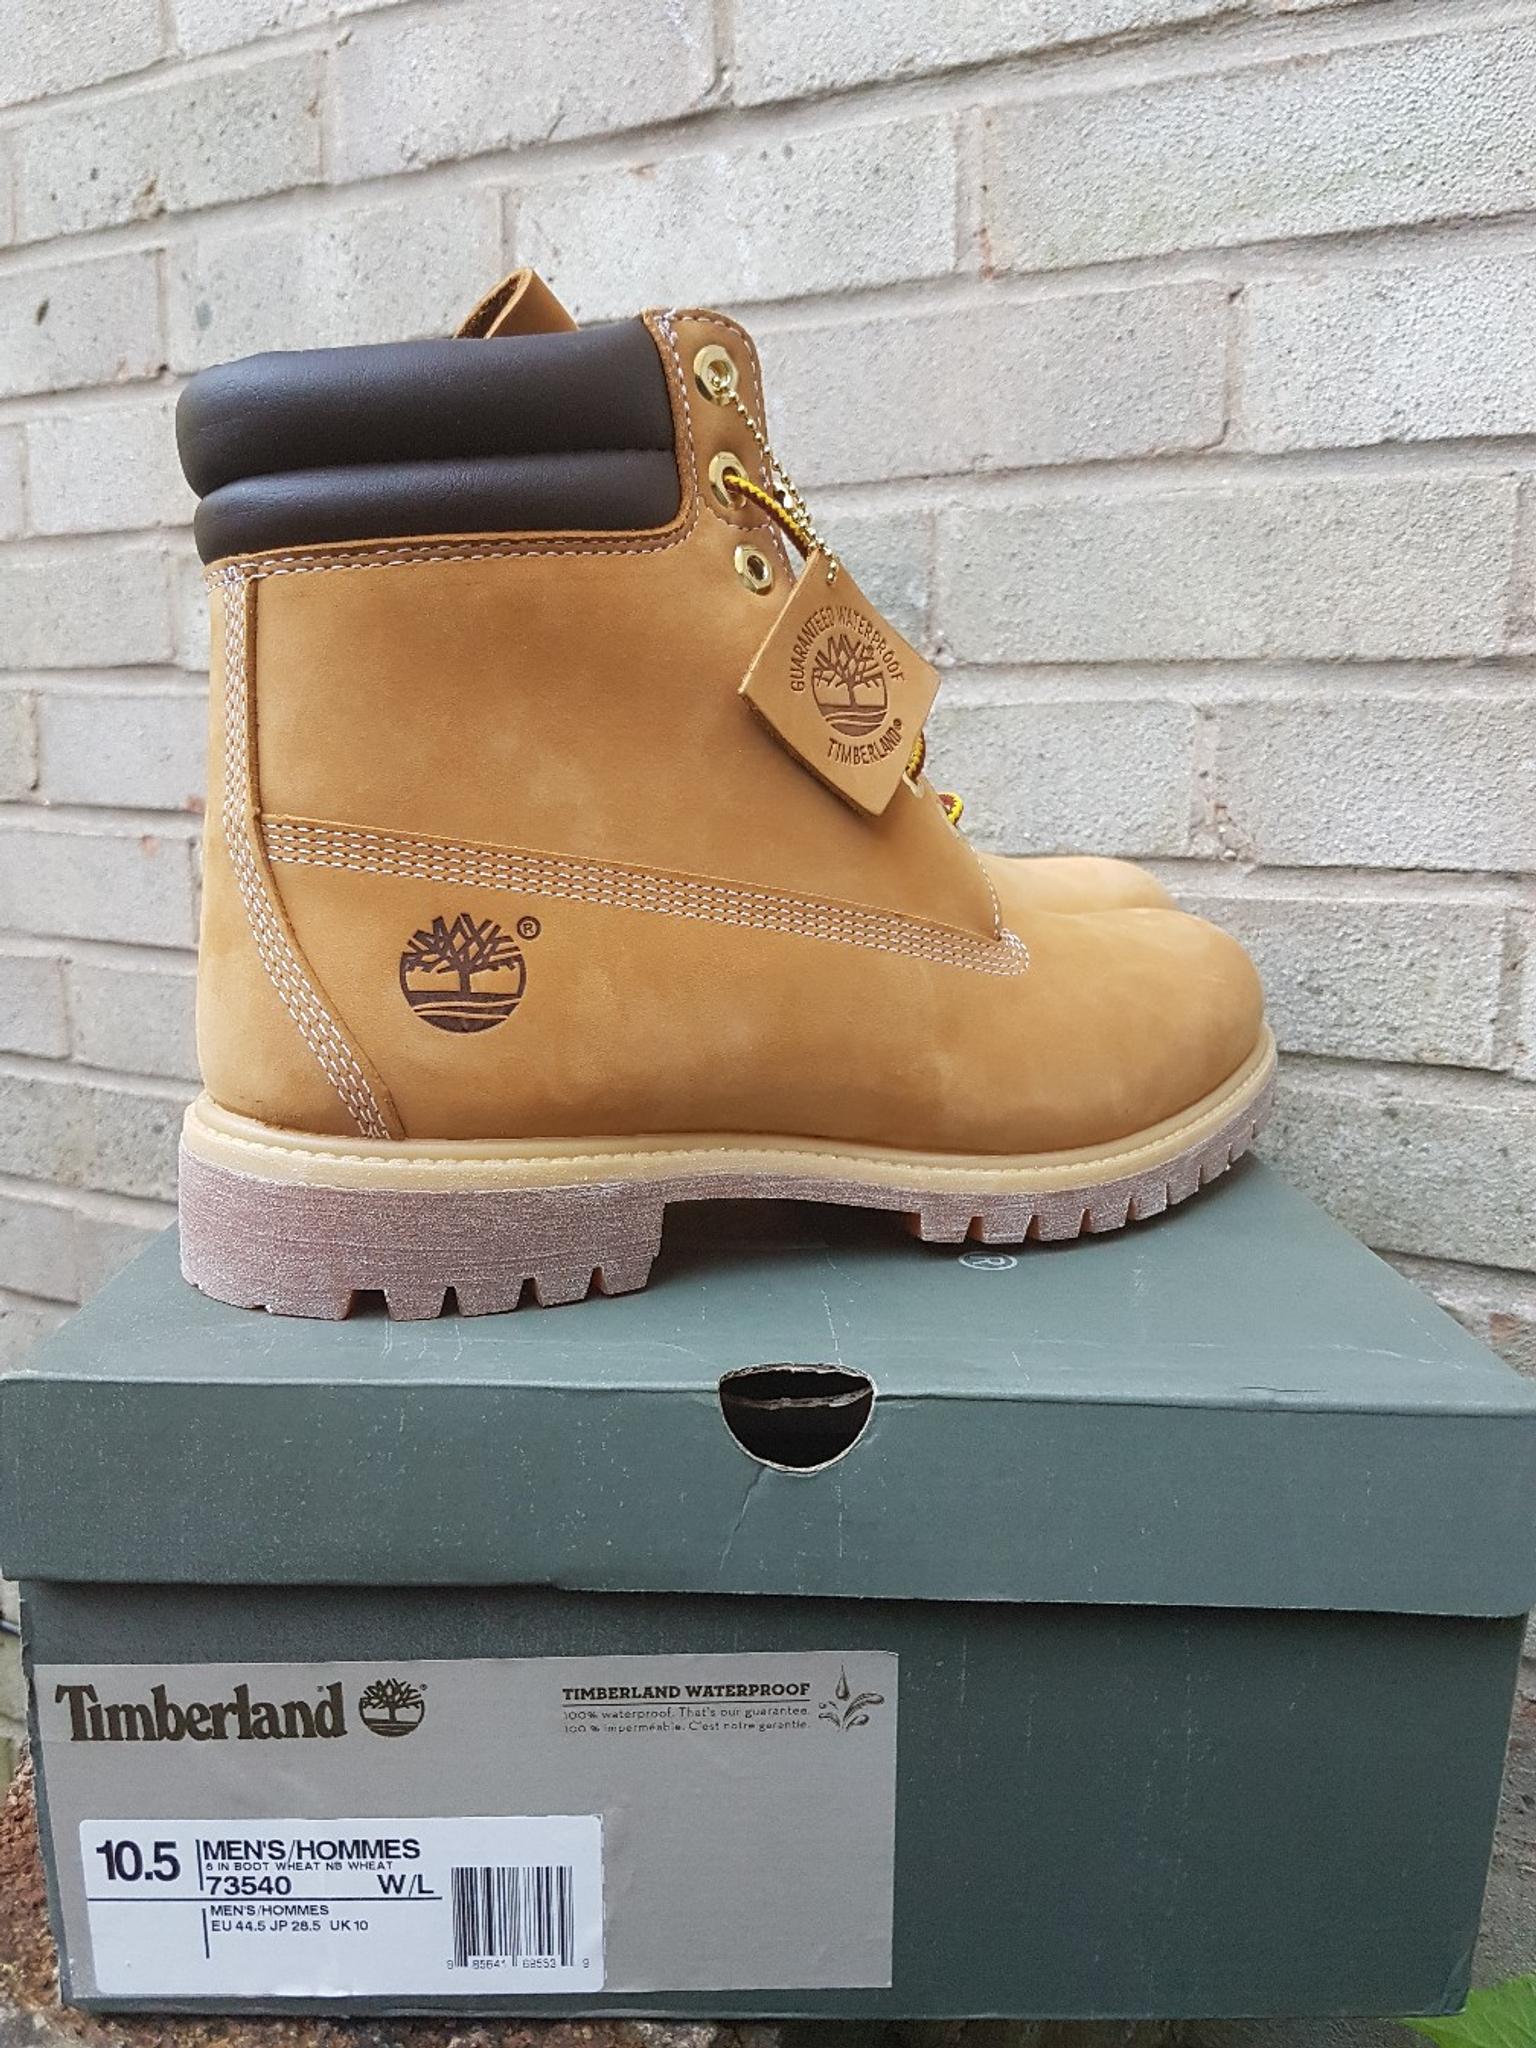 mens timberland boots size 10